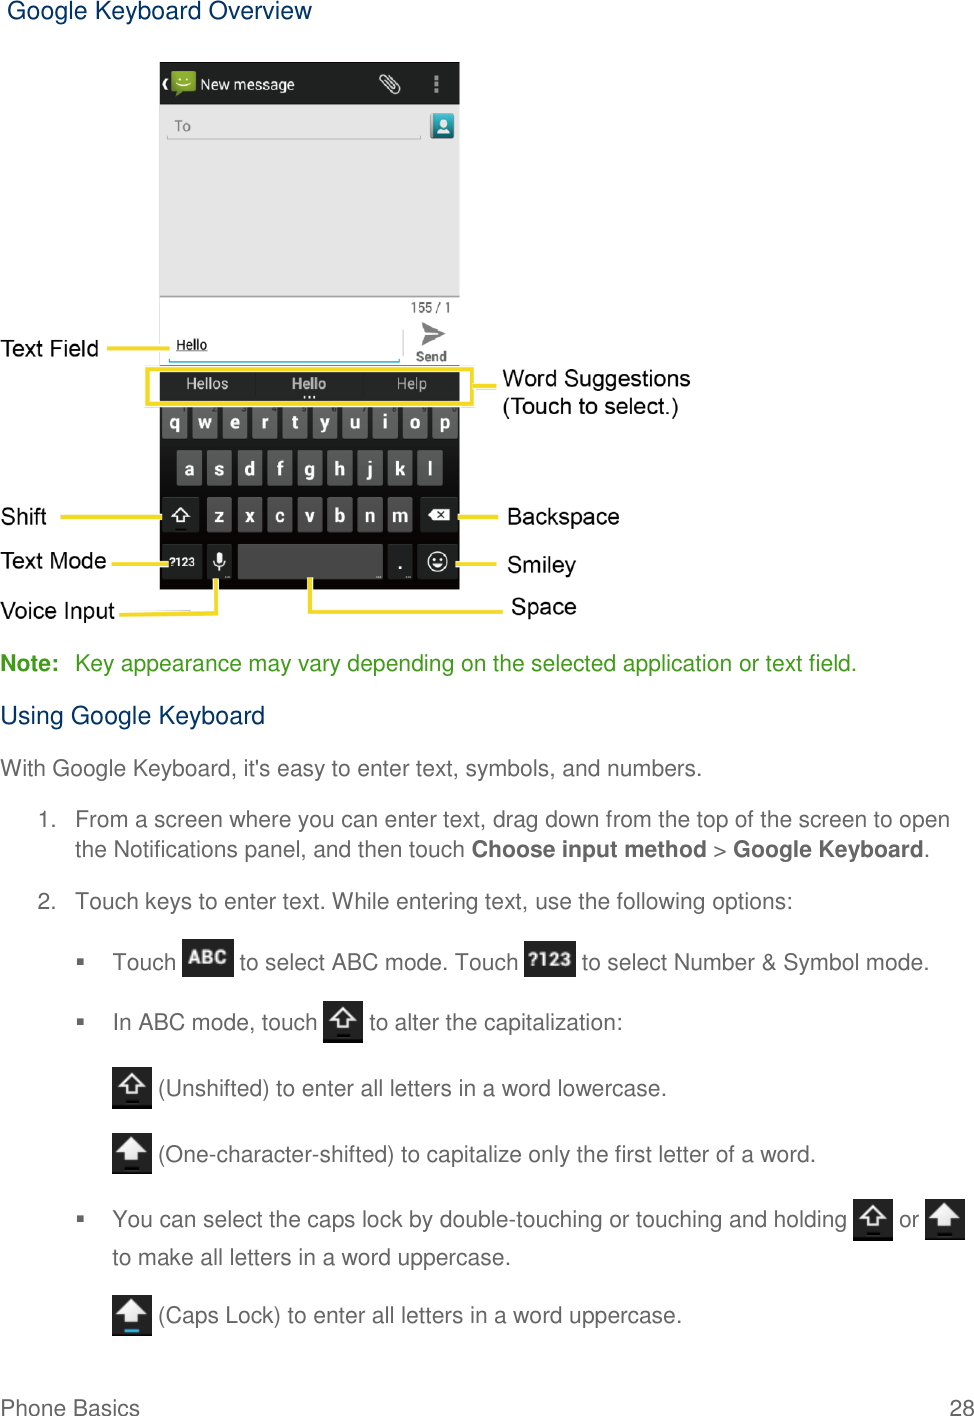 Phone Basics  28  Google Keyboard Overview   Note:  Key appearance may vary depending on the selected application or text field. Using Google Keyboard With Google Keyboard, it&apos;s easy to enter text, symbols, and numbers. 1.  From a screen where you can enter text, drag down from the top of the screen to open the Notifications panel, and then touch Choose input method &gt; Google Keyboard. 2.  Touch keys to enter text. While entering text, use the following options:   Touch   to select ABC mode. Touch   to select Number &amp; Symbol mode.   In ABC mode, touch   to alter the capitalization:  (Unshifted) to enter all letters in a word lowercase.  (One-character-shifted) to capitalize only the first letter of a word.   You can select the caps lock by double-touching or touching and holding   or   to make all letters in a word uppercase.  (Caps Lock) to enter all letters in a word uppercase. 